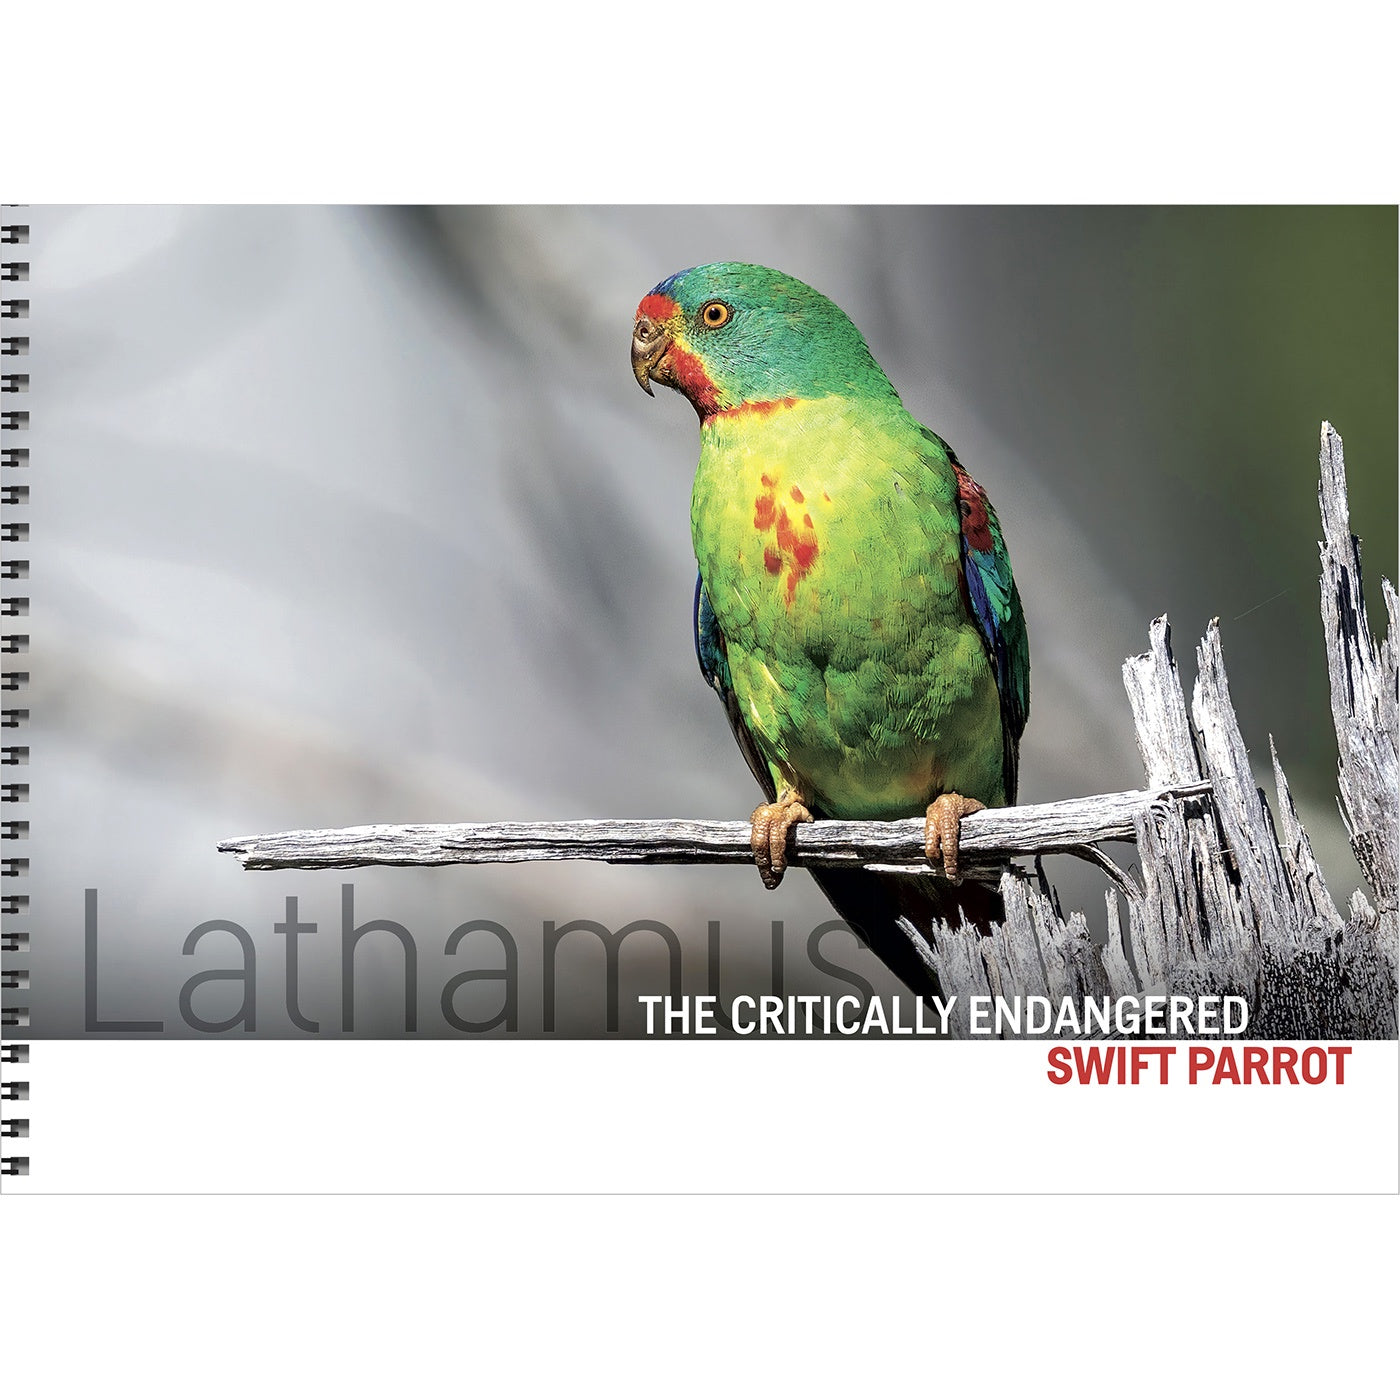 Lathamus - The Critically Endangered Swift Parrot